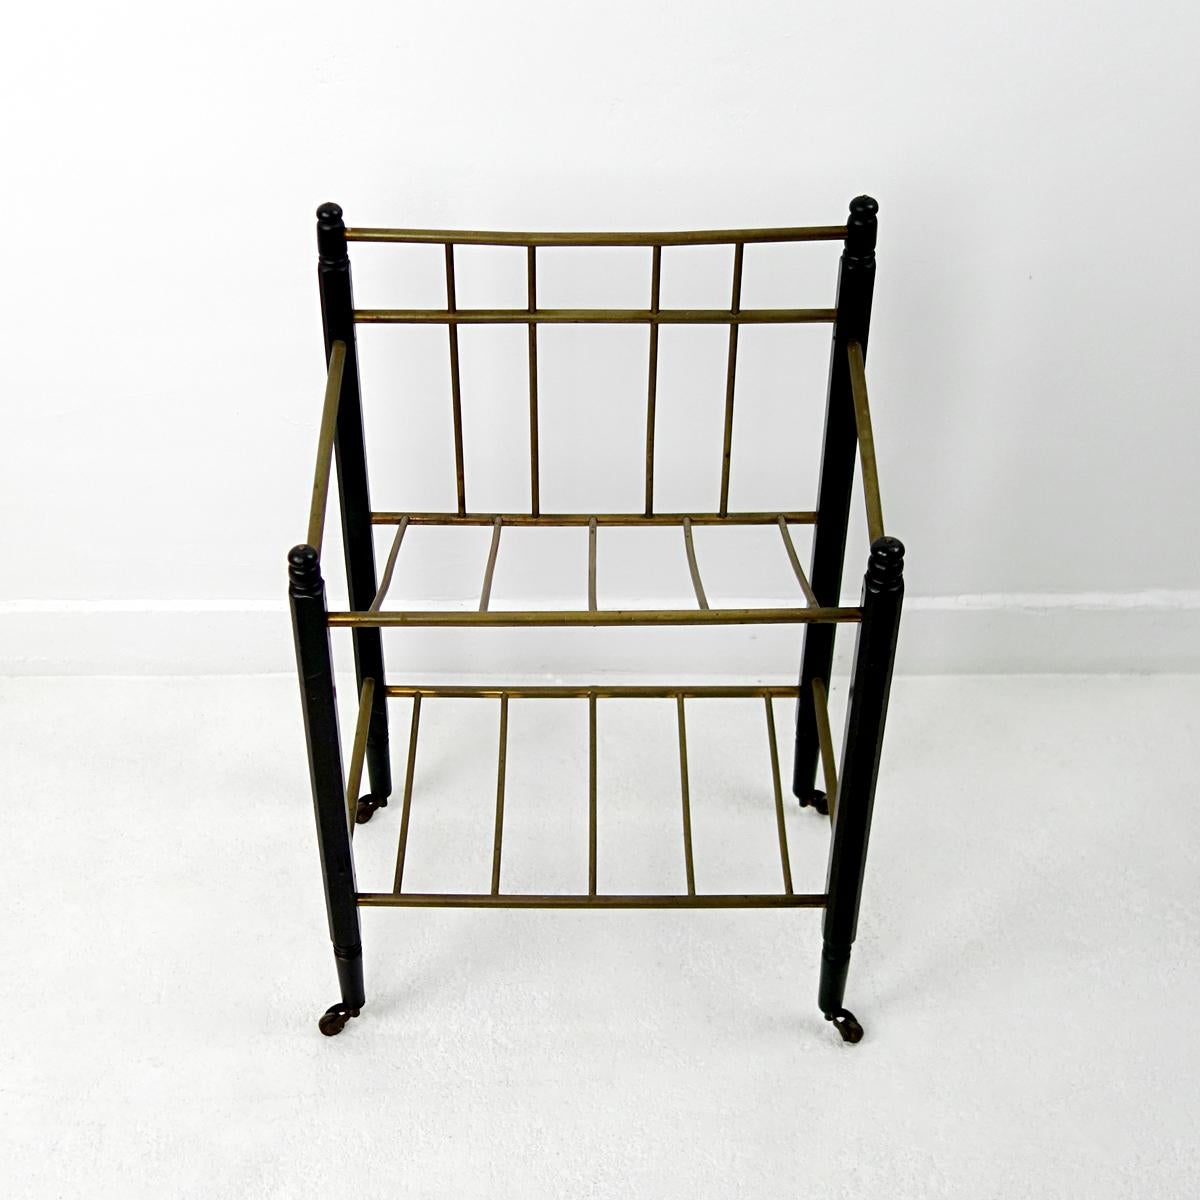 This Art Deco magazine stand was produced by Ernst Rockhausen & Söhne.
Its frame is made of ebonized mahogany and it has brass tubes to carry your magazines.
This elegant piece would be both a practical as a decorative element in your living, den